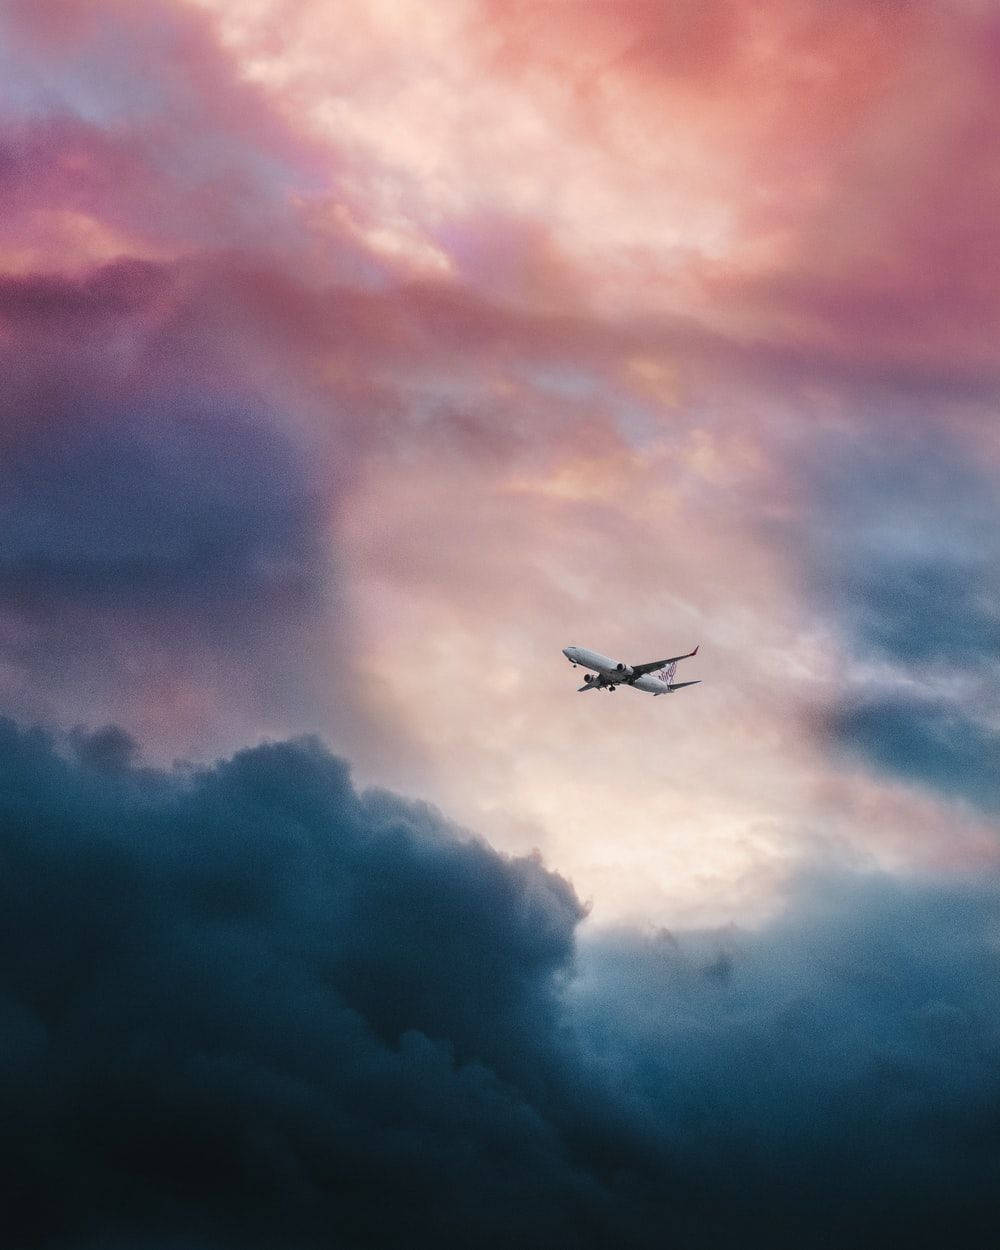 Cloudy Sky With Airplane Android Wallpaper